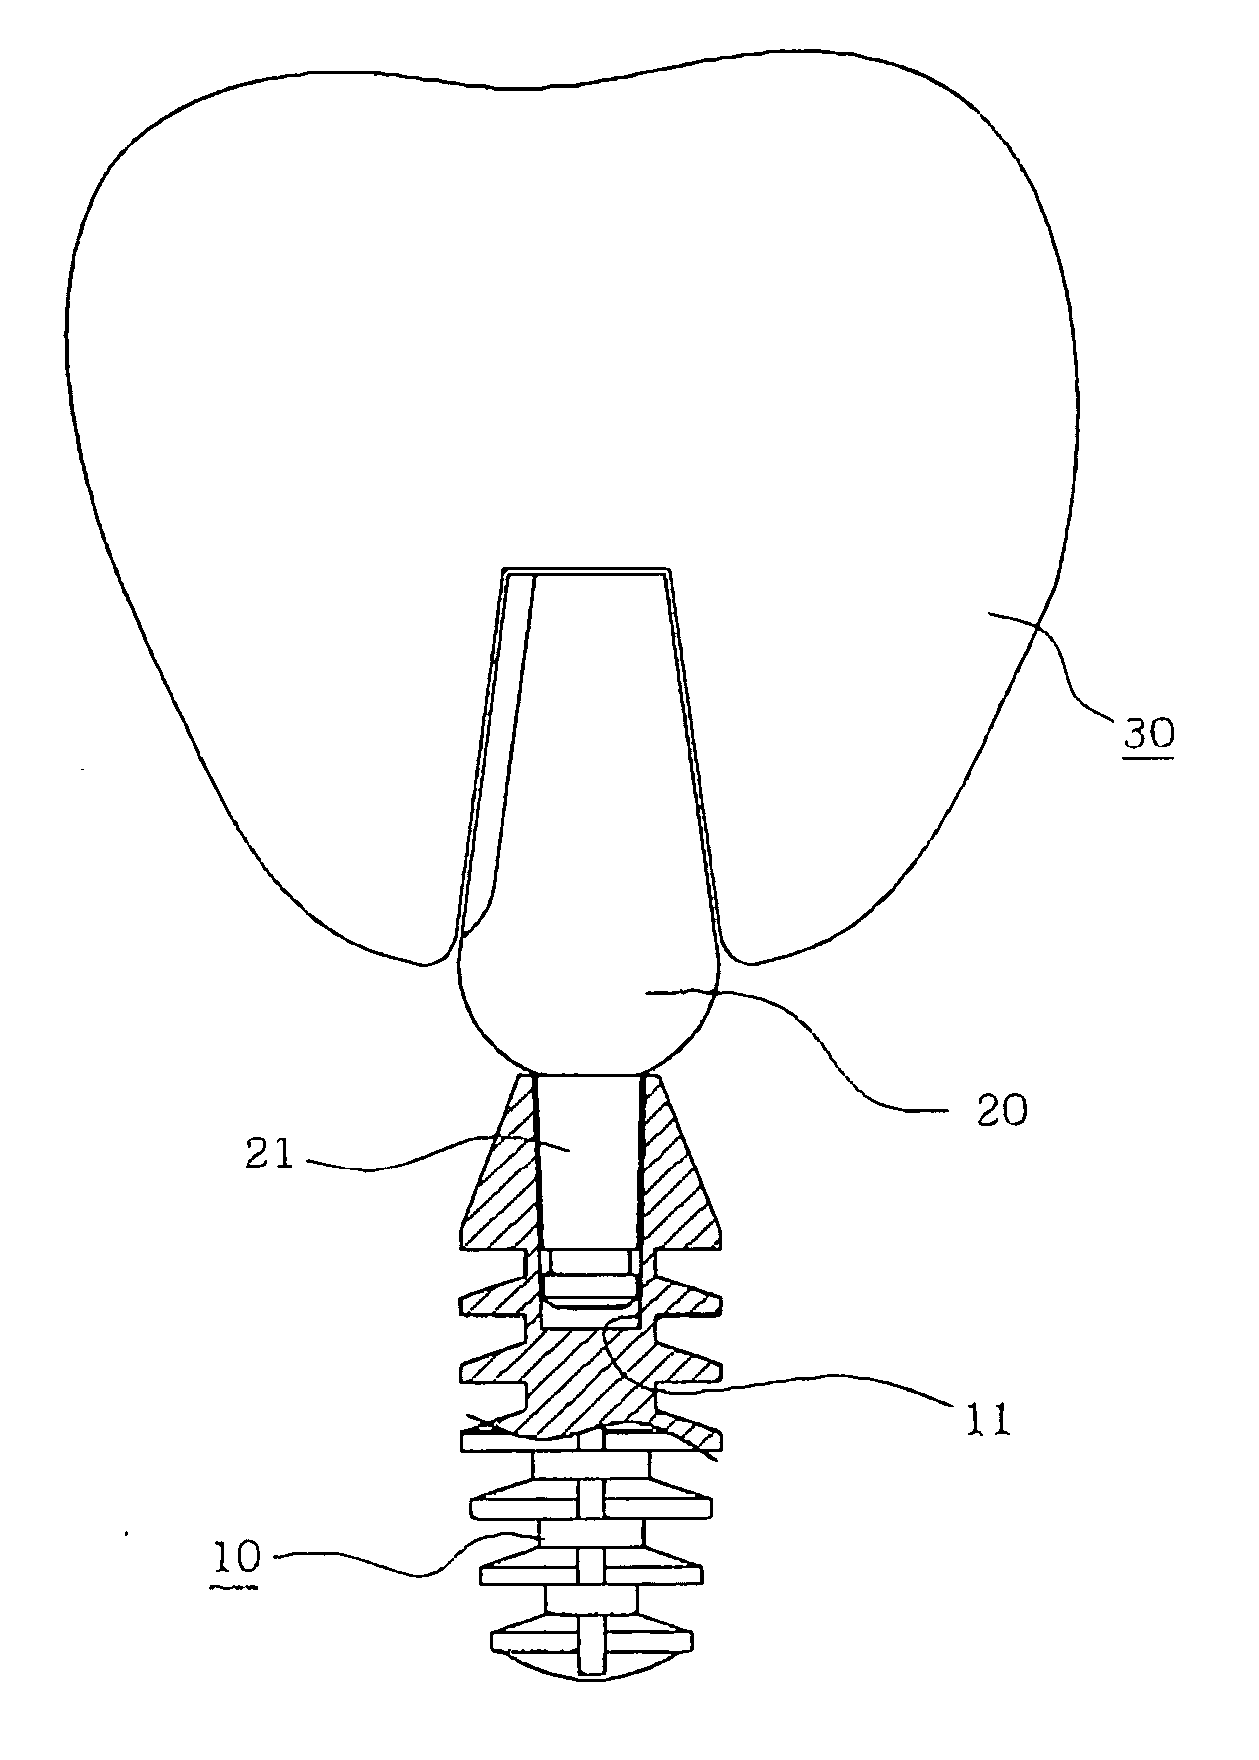 Abutment of implant system